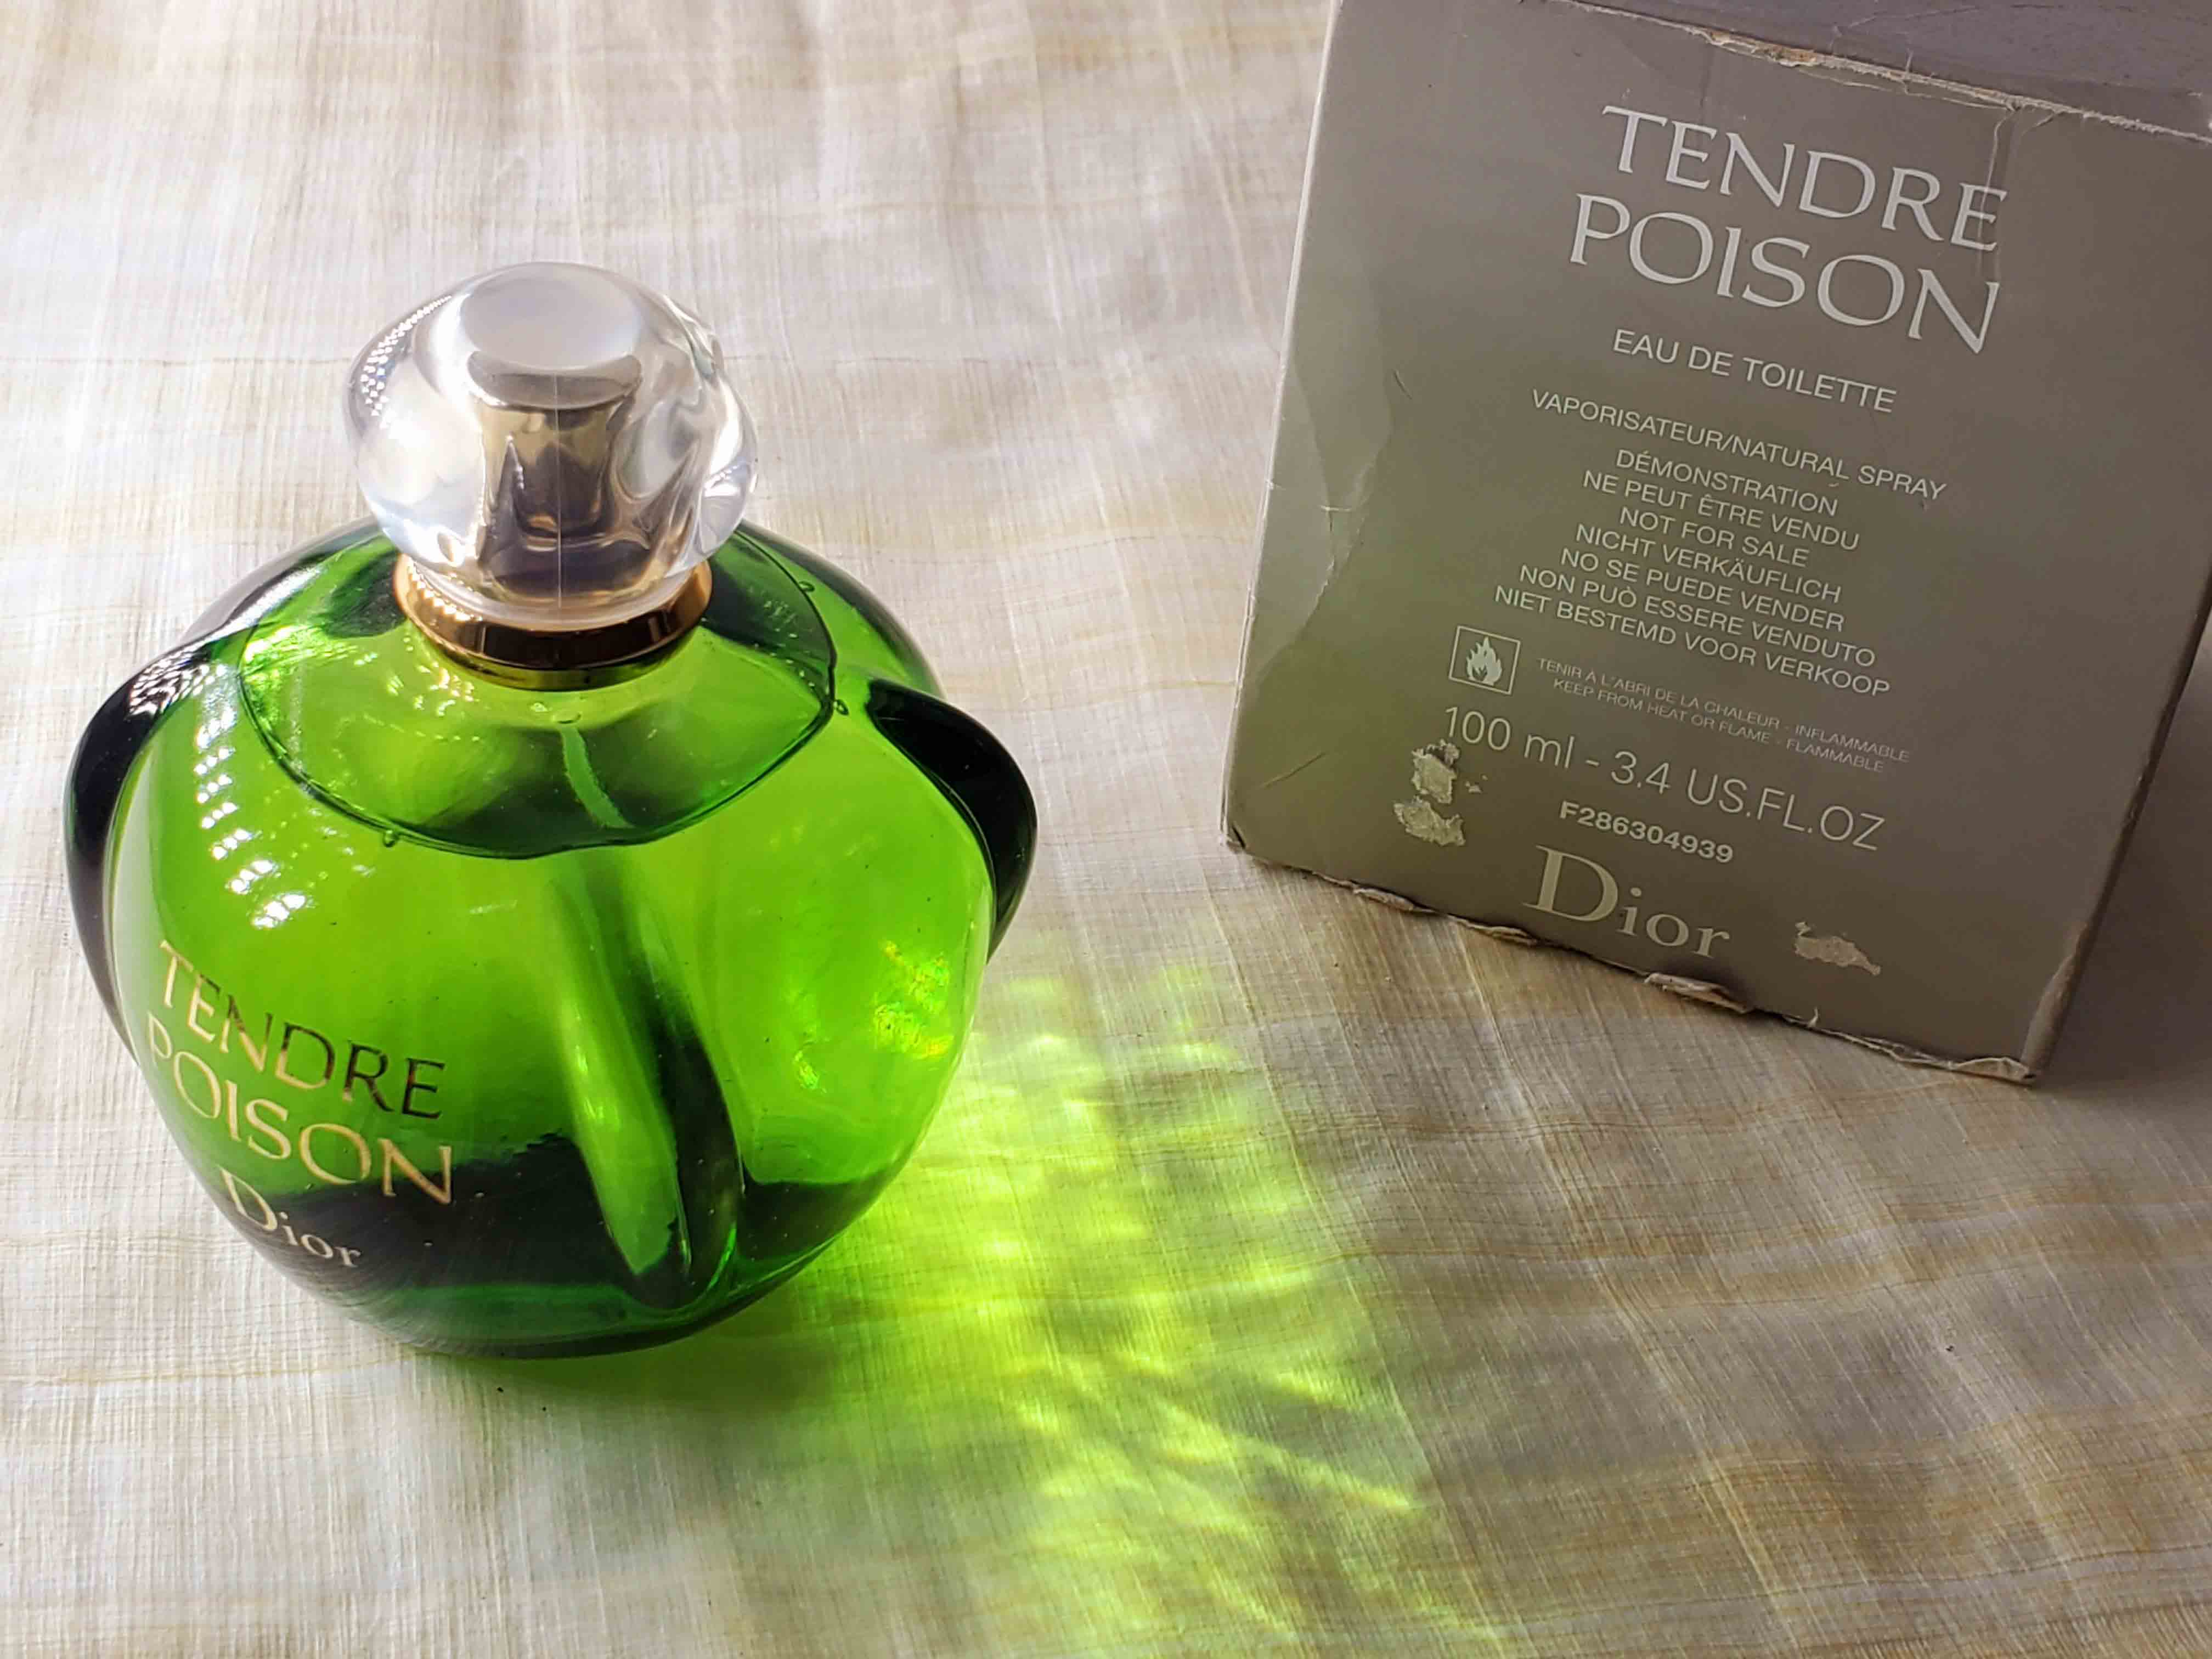 Tendre Poison by Christian Dior EDT Spray 100 ml 3.4 oz Tester OR